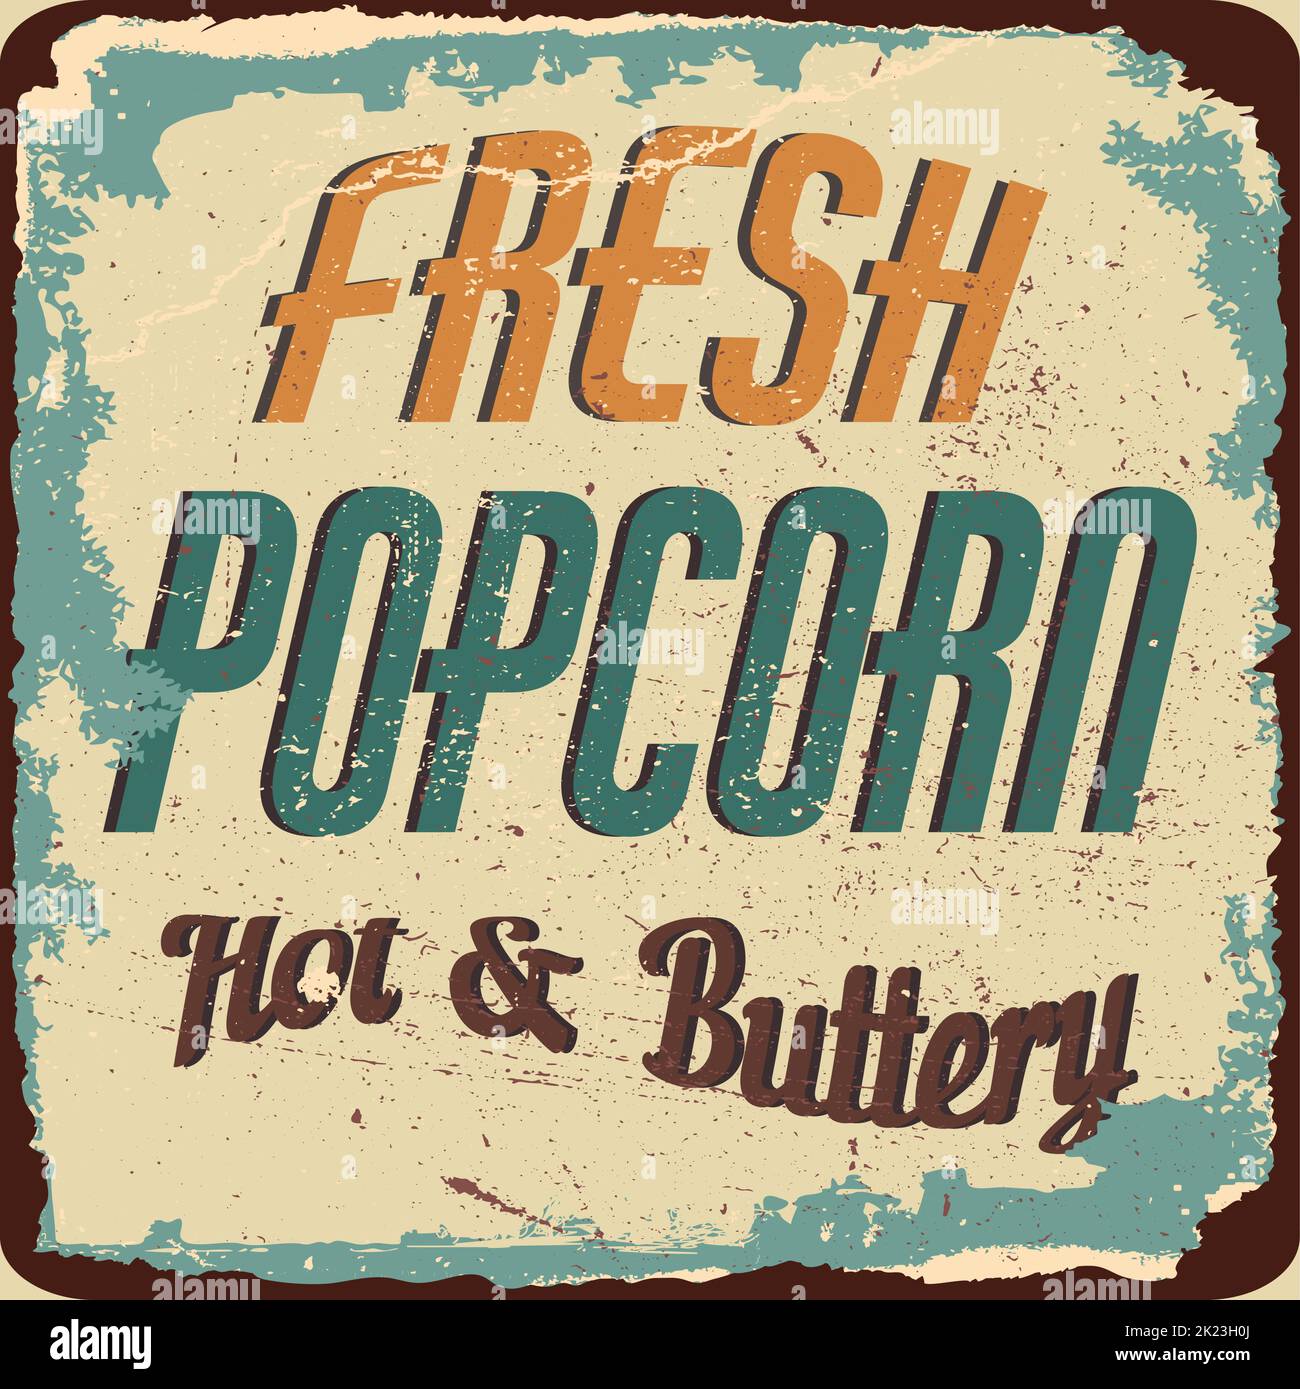 Vintage Popcorn metal sign.Retro poster 1950s style. Stock Vector